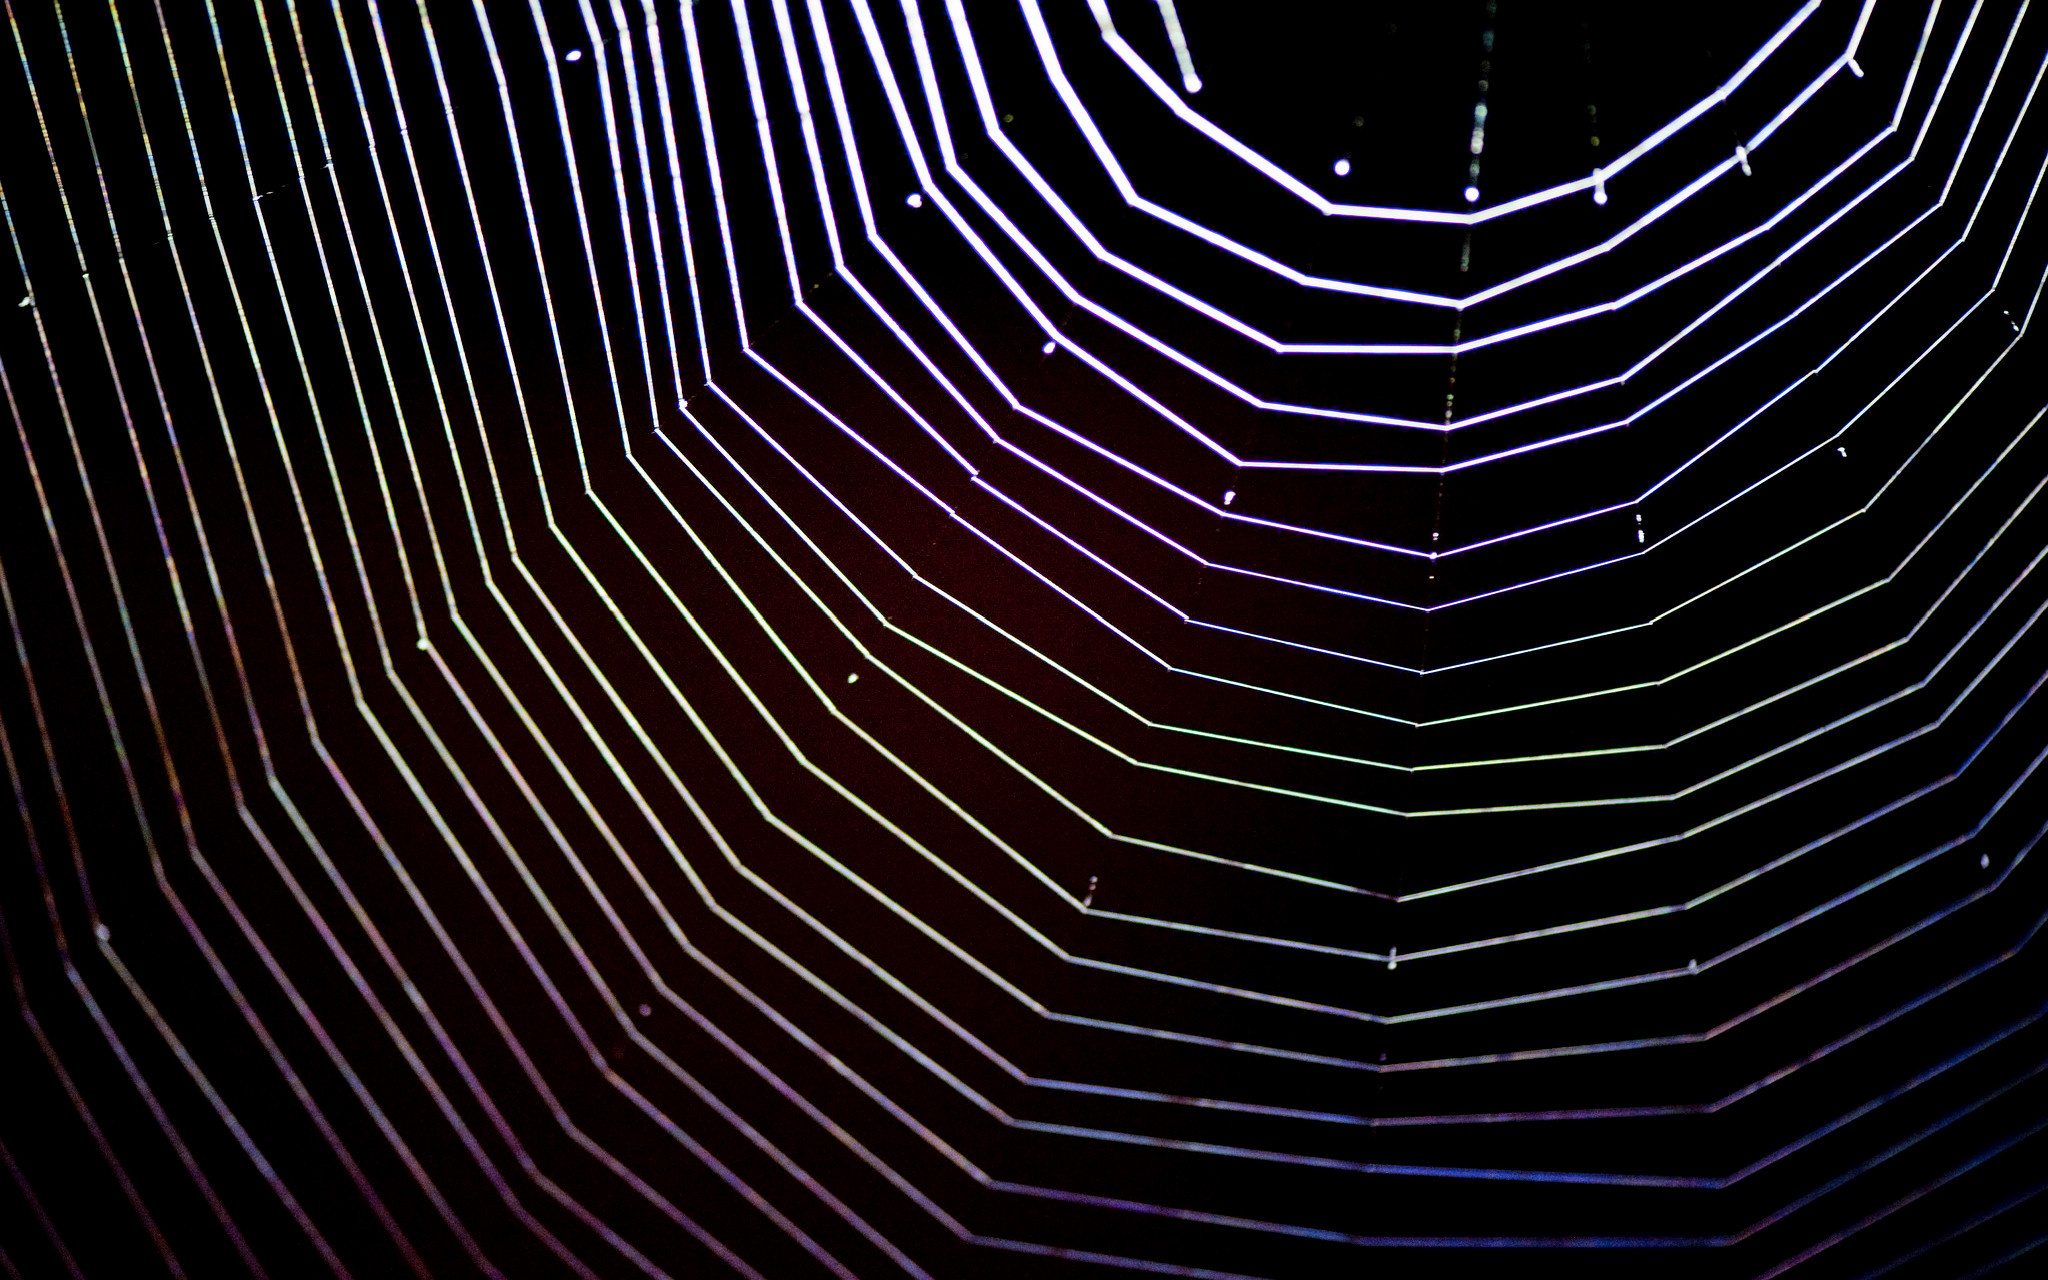 Image: A spider web.